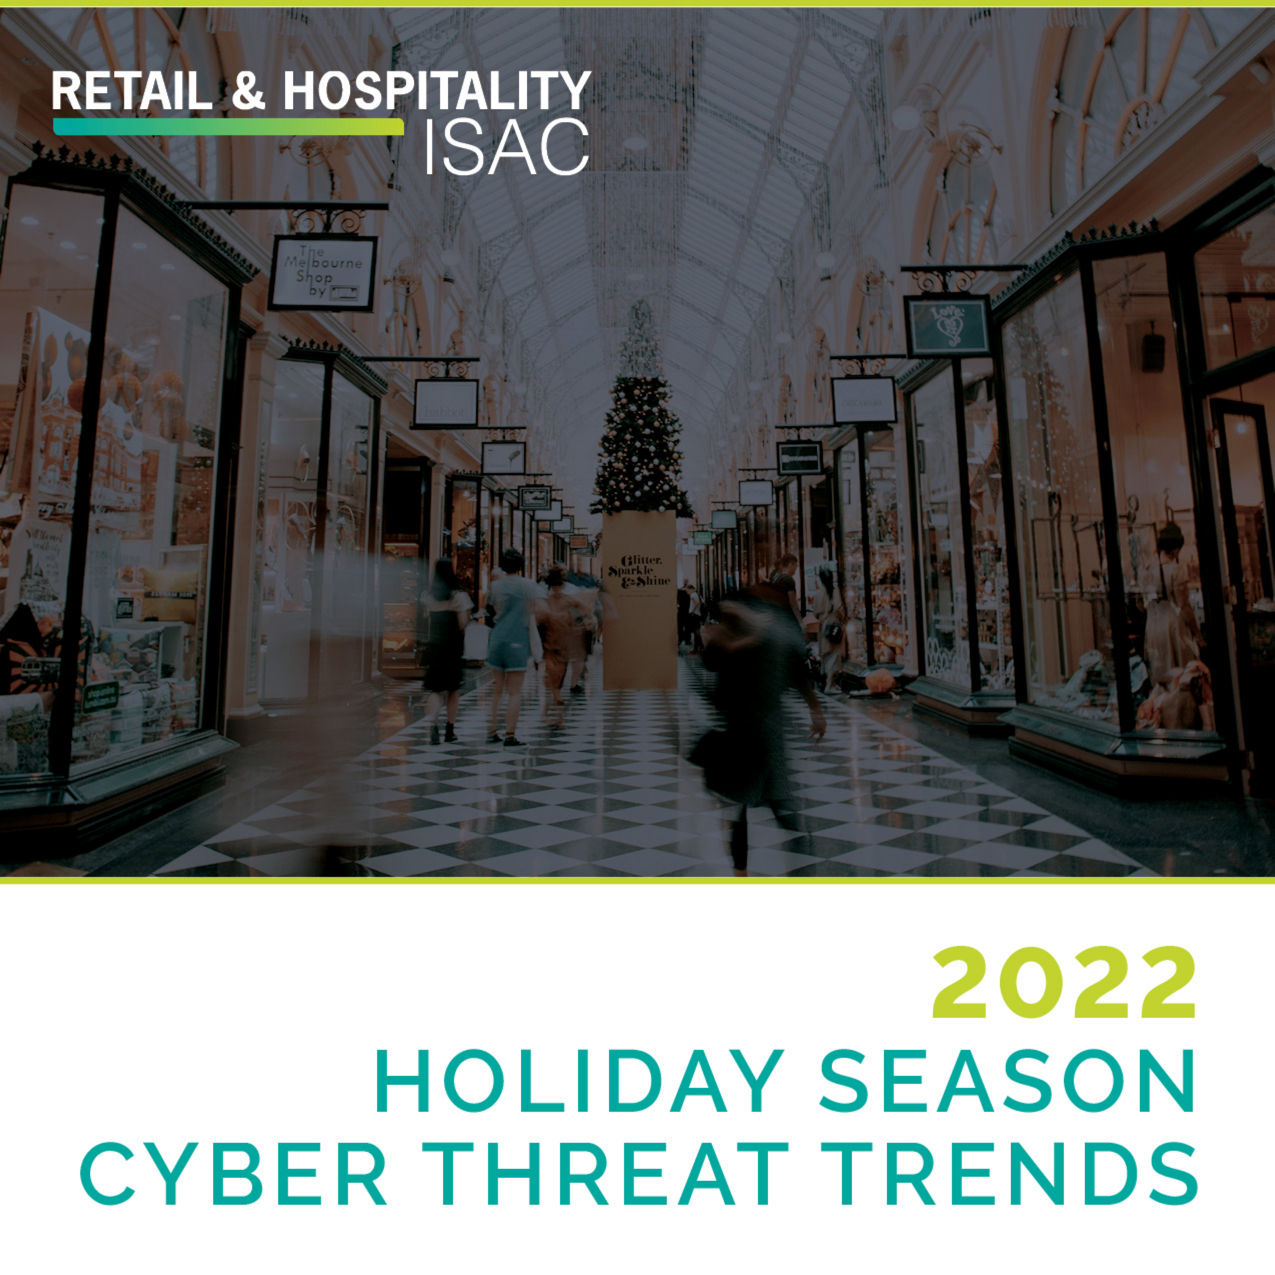 Rh Isac New Report Examines Holiday Season Cyber Threat Trends In Retail And Hospitality Rh Isac